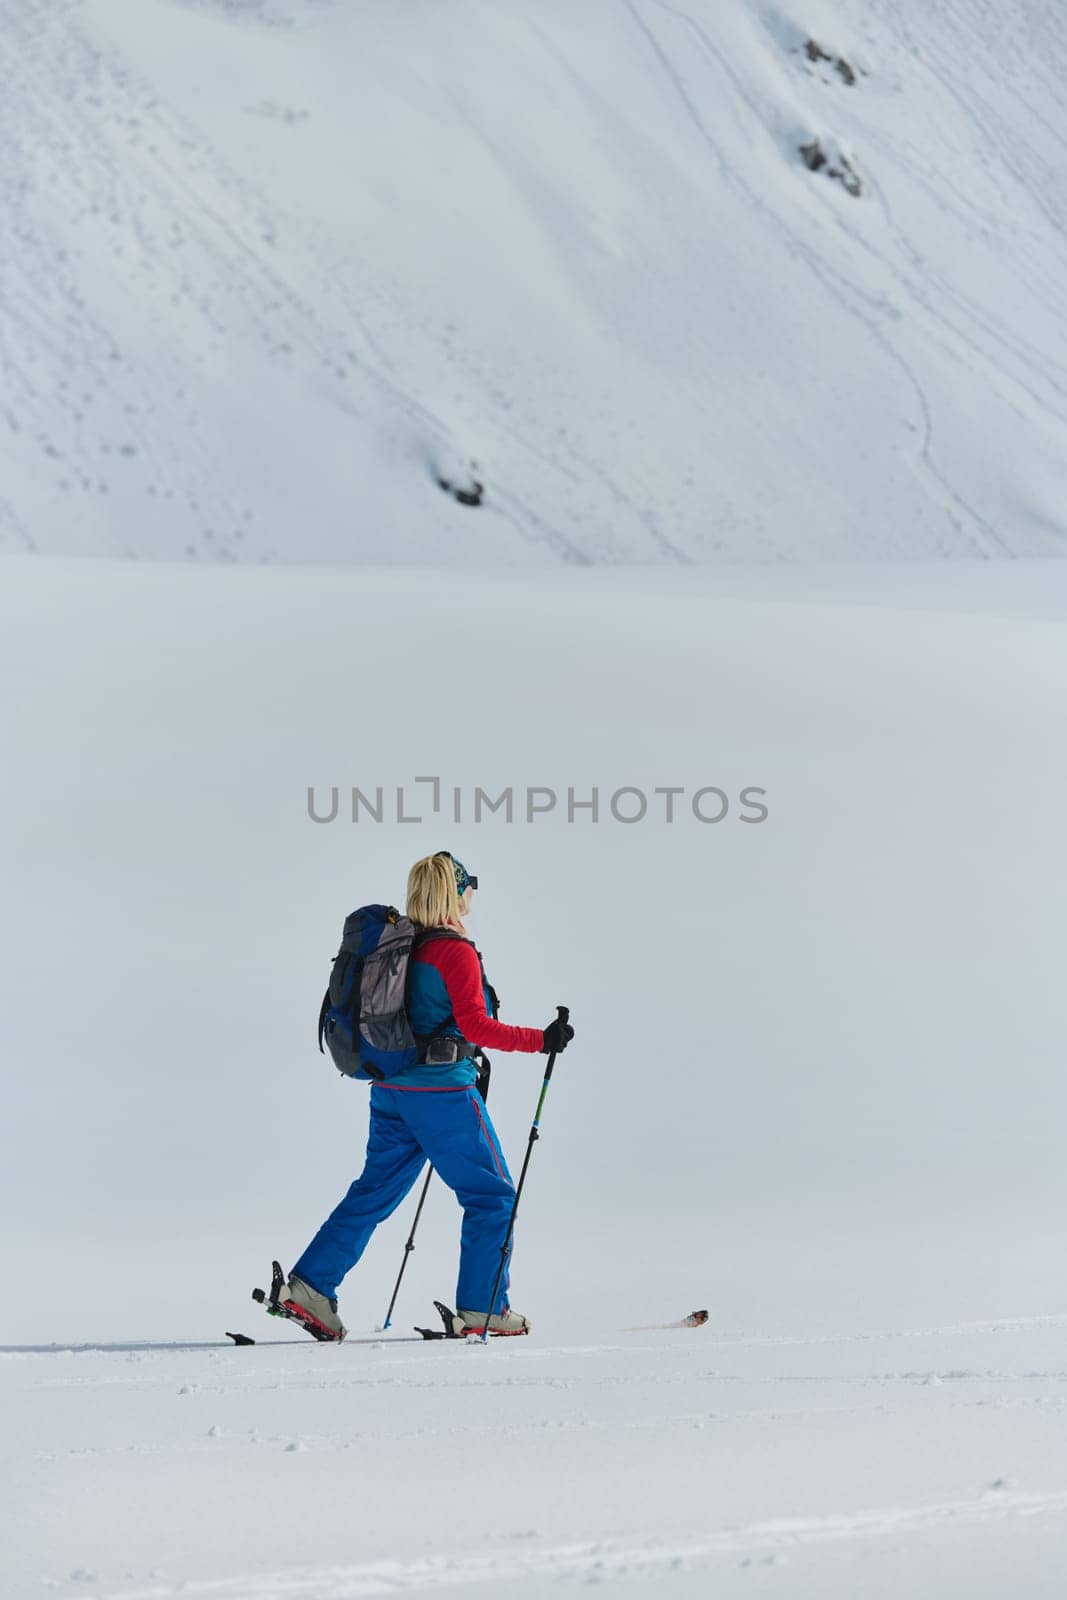 A determined skier scales a snow-capped peak in the Alps, carrying backcountry gear for an epic descent